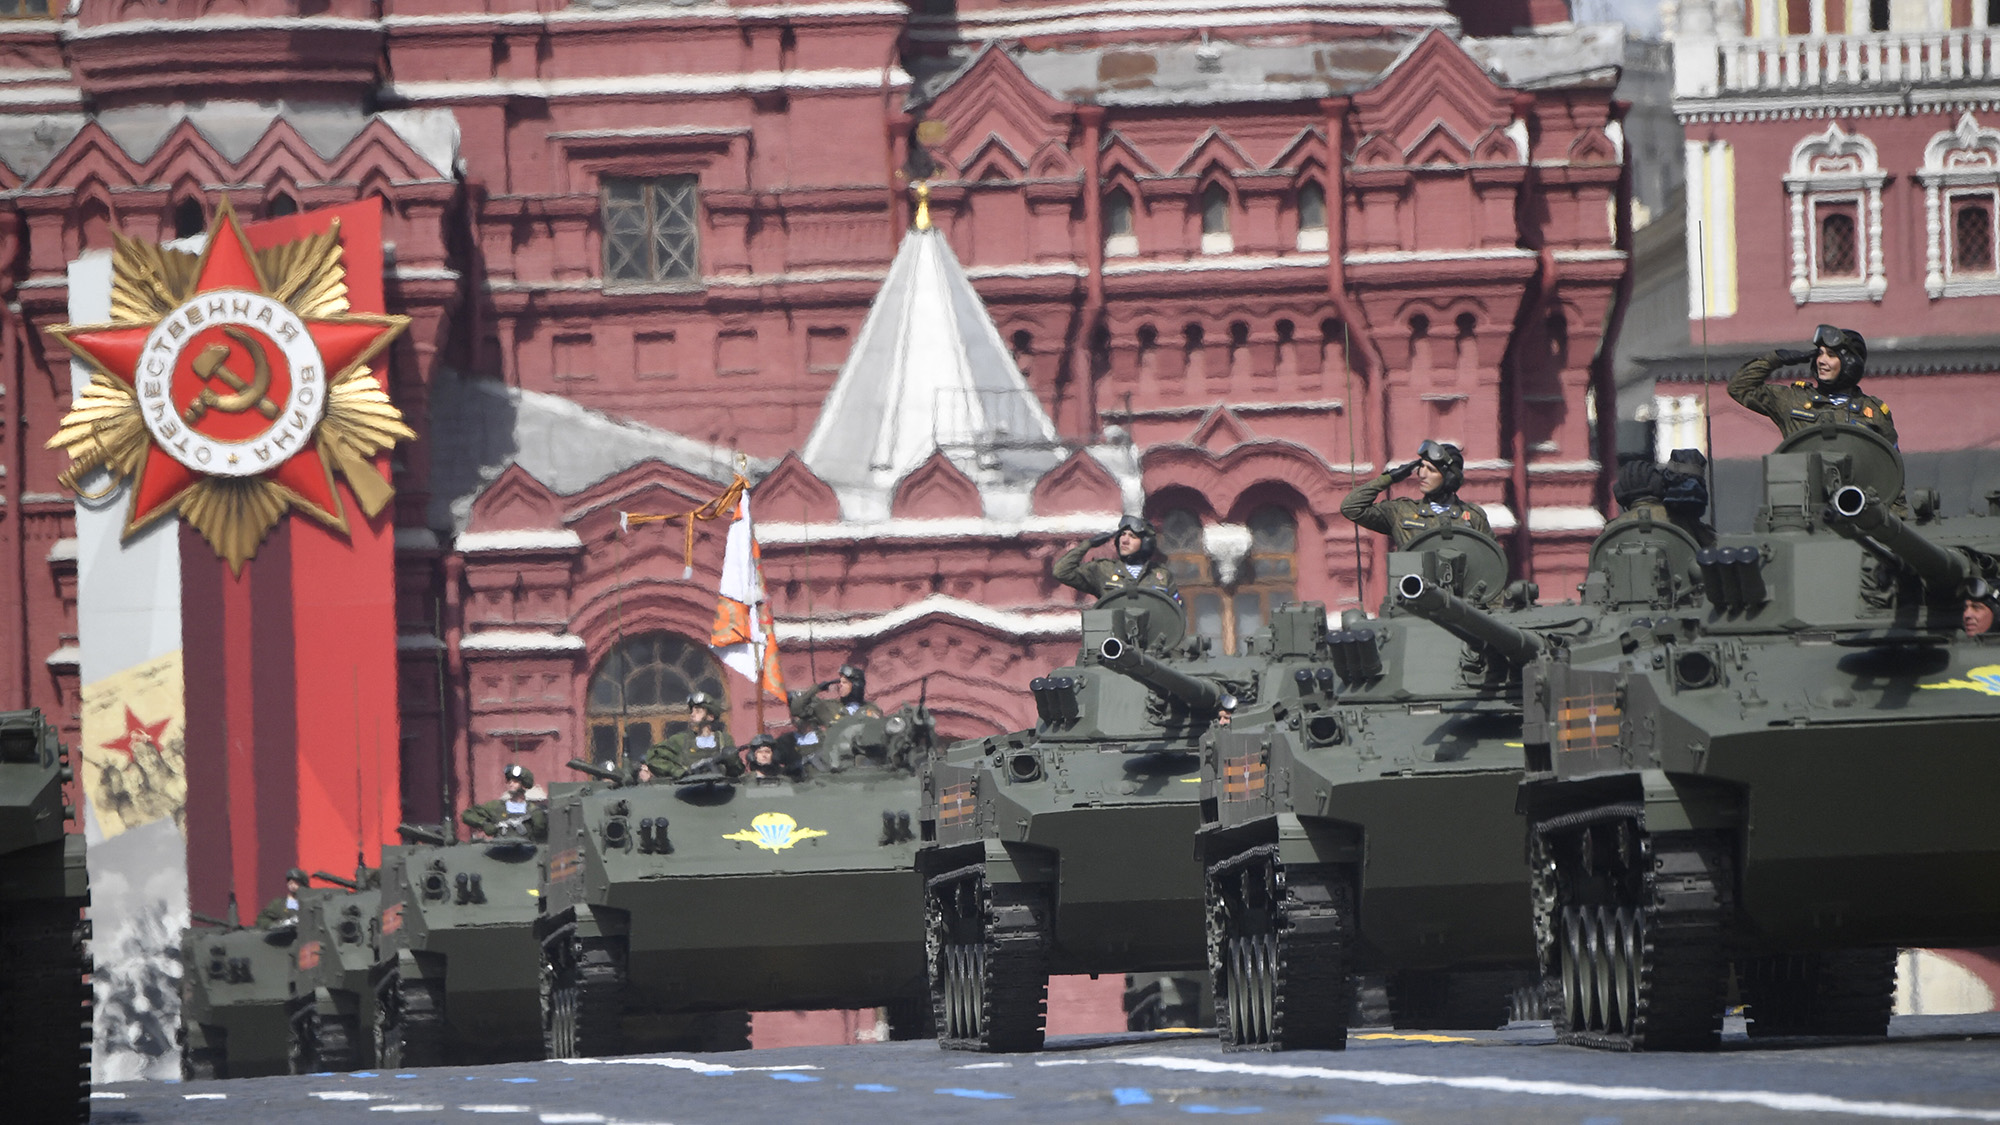 Russian service personnel ride military vehicles during the Victory Day military parade at Red Square in central Moscow, Russia, on May 9.